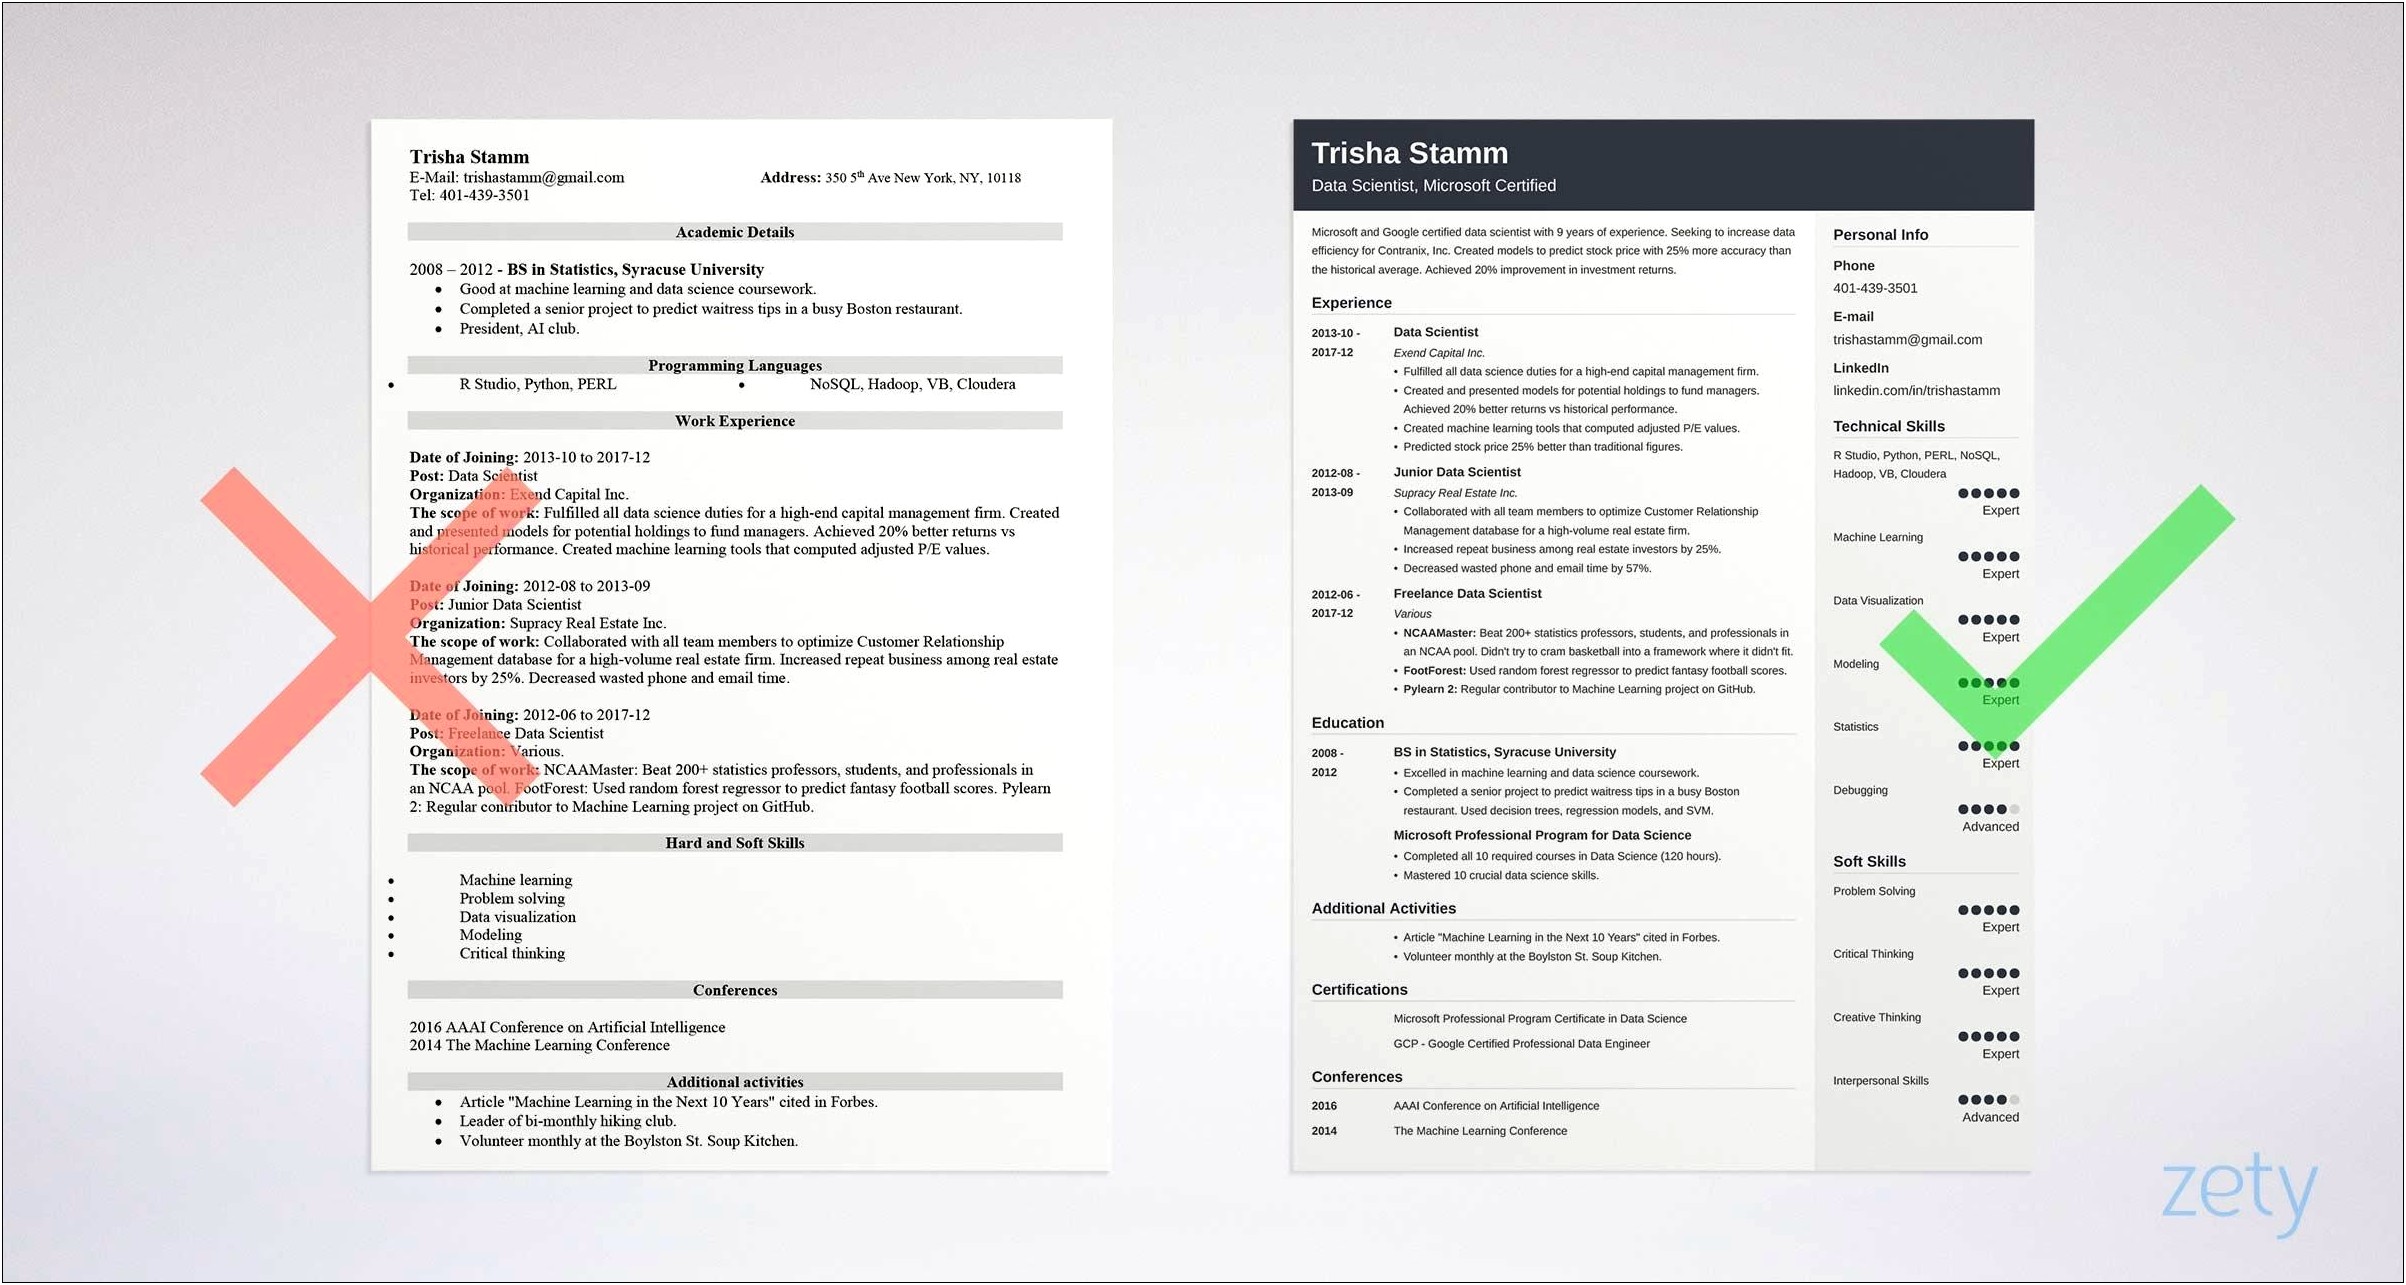 Resume Executive Summary Passion For Data Science